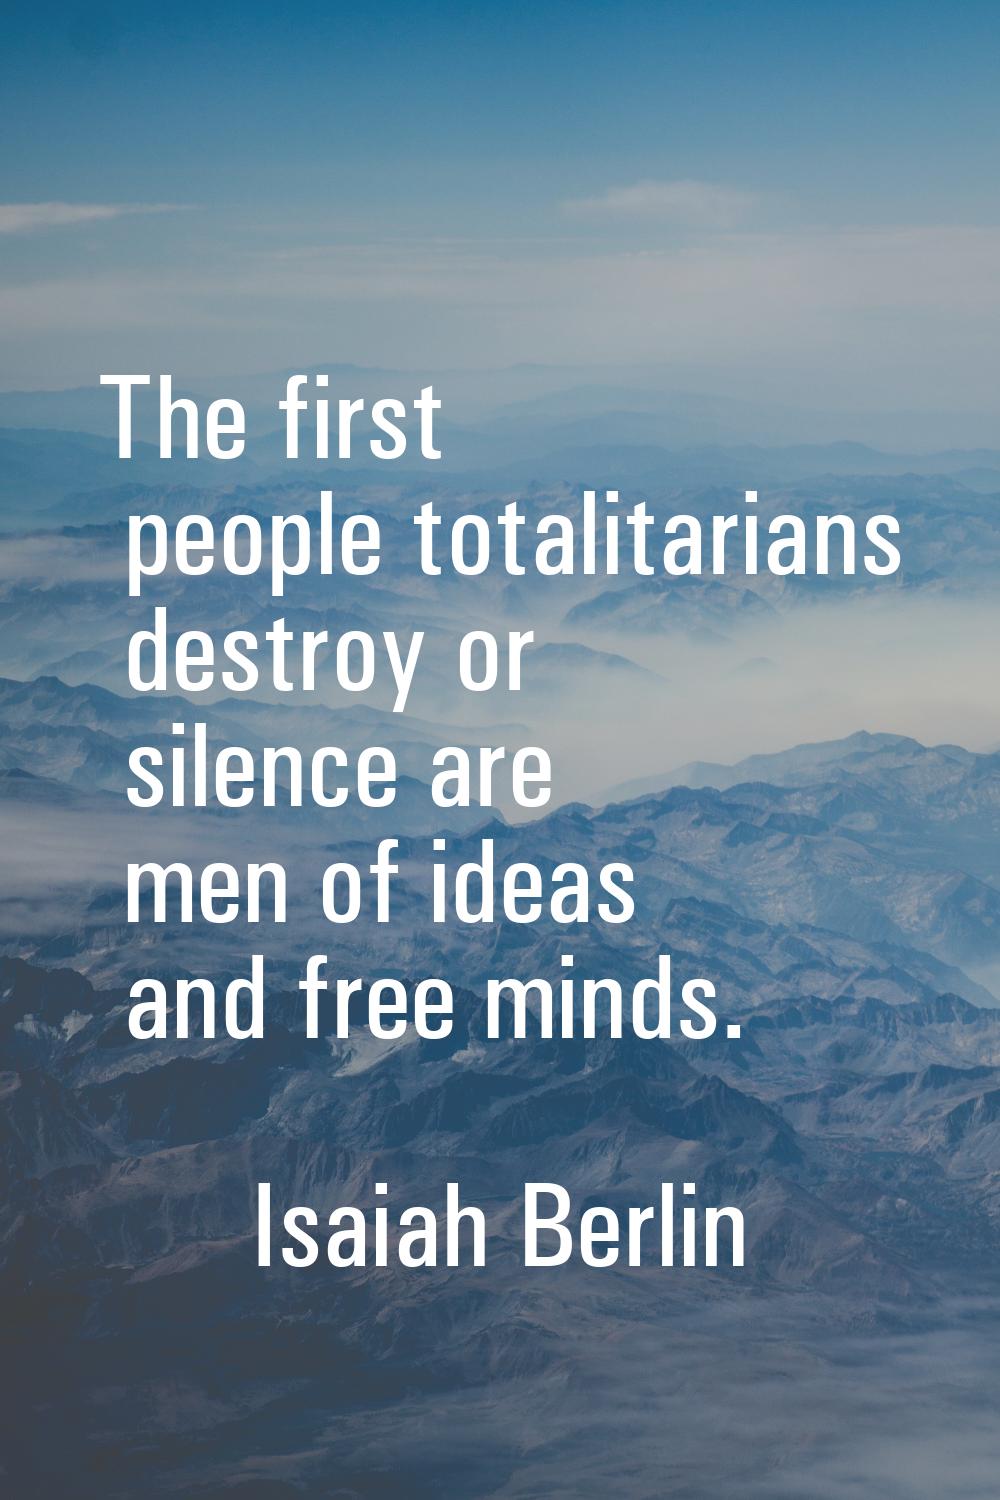 The first people totalitarians destroy or silence are men of ideas and free minds.